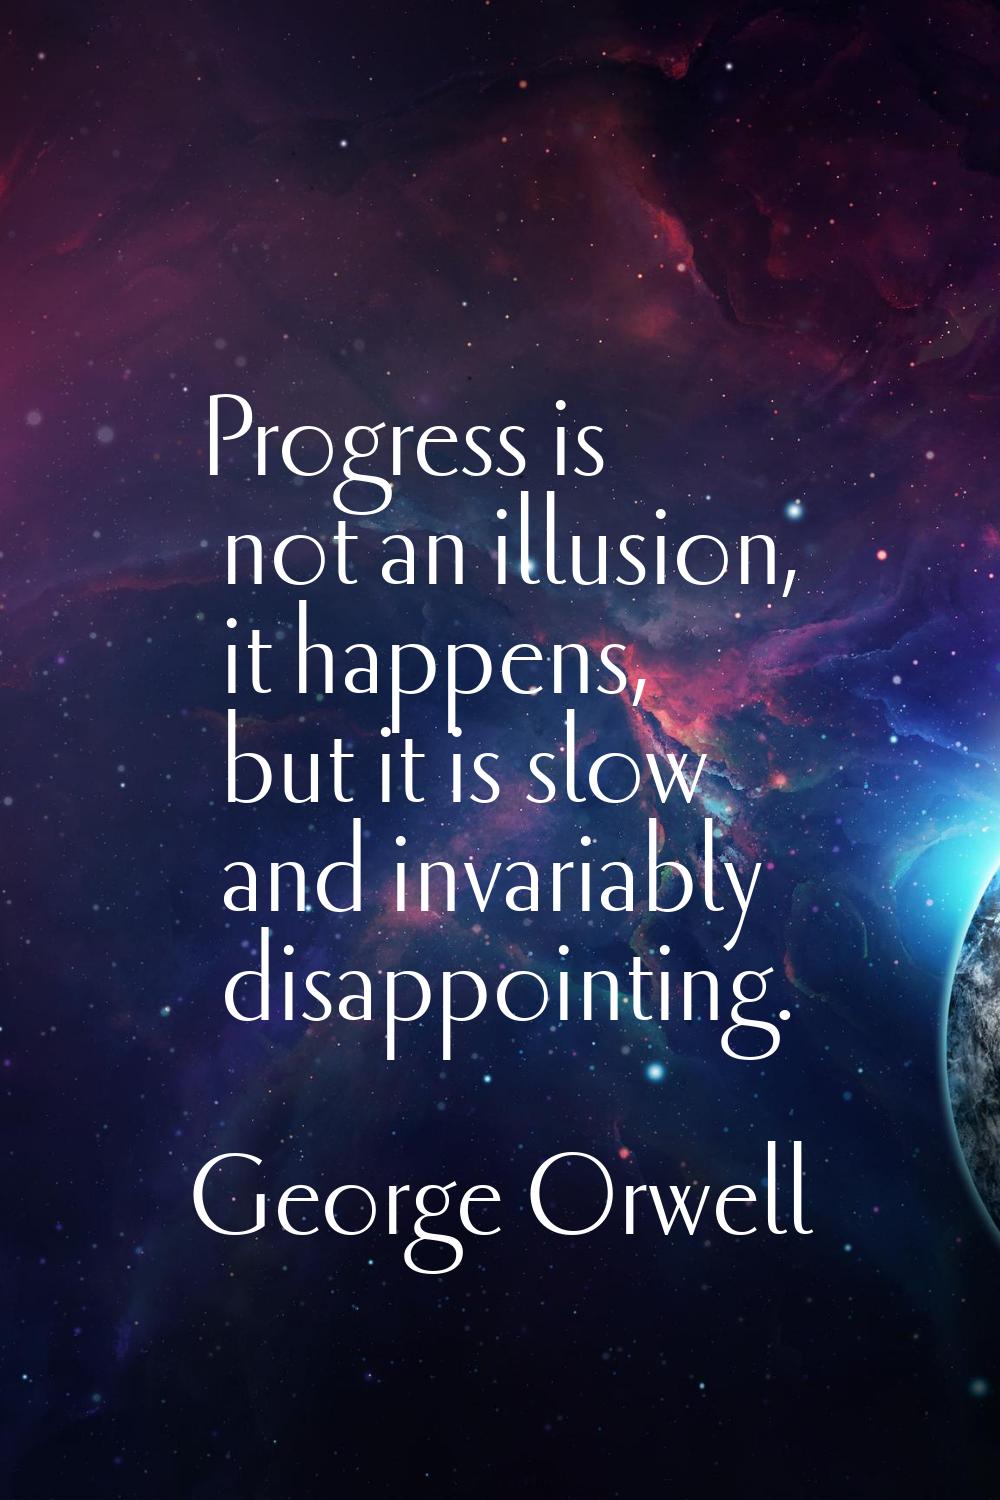 Progress is not an illusion, it happens, but it is slow and invariably disappointing.